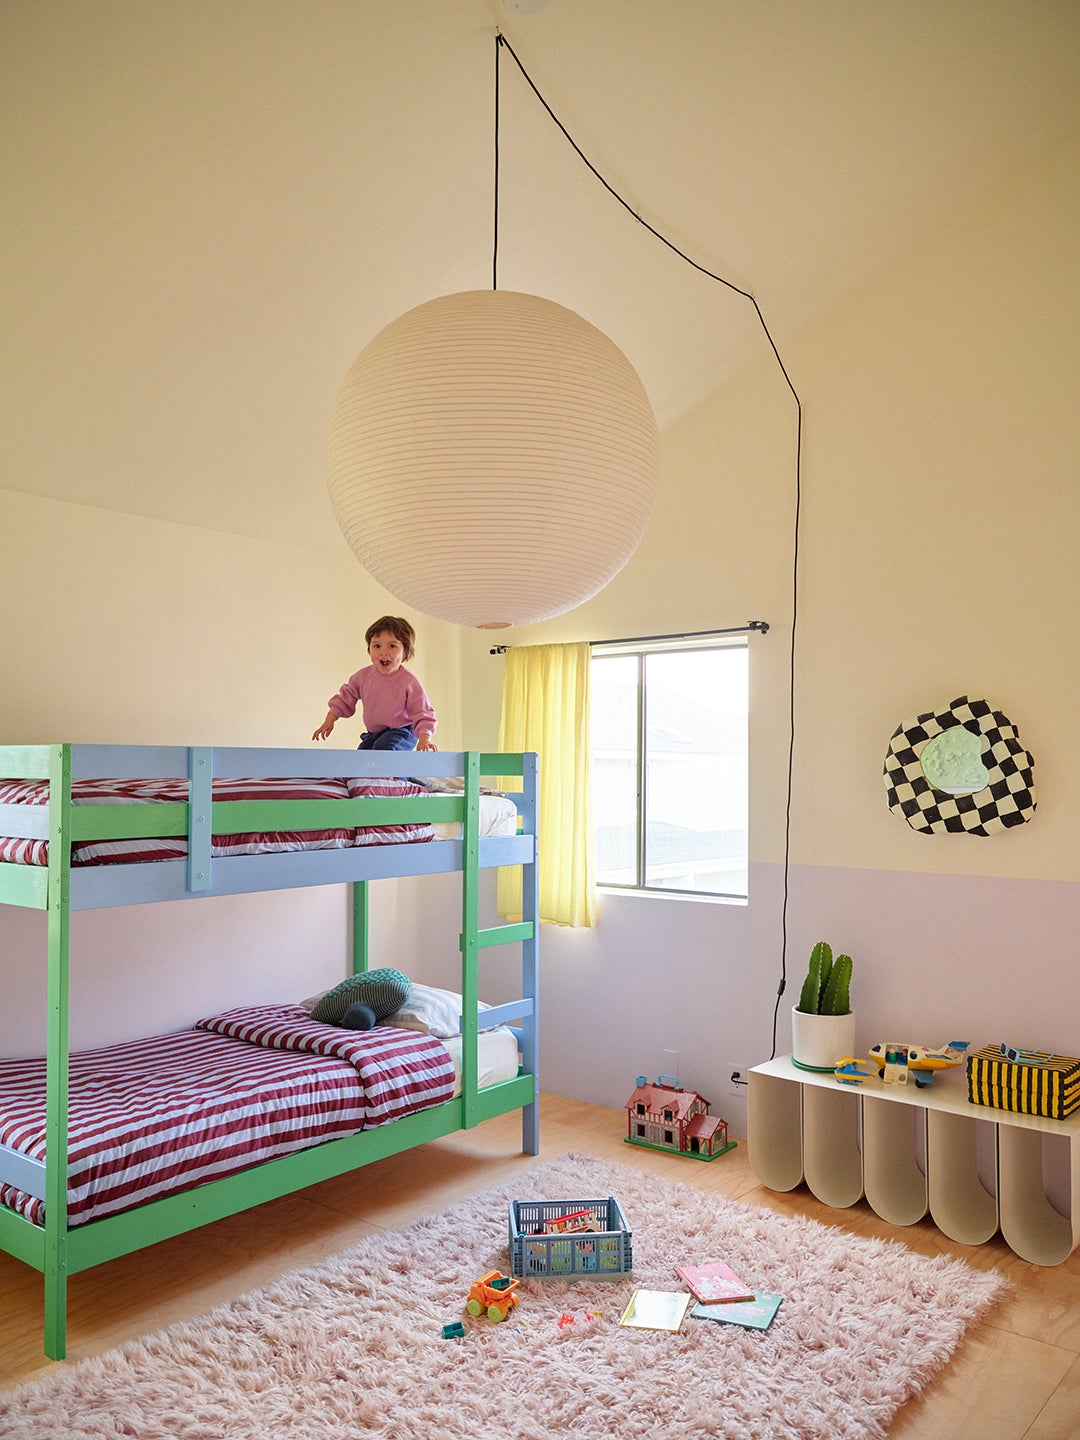 kid on bunk bed